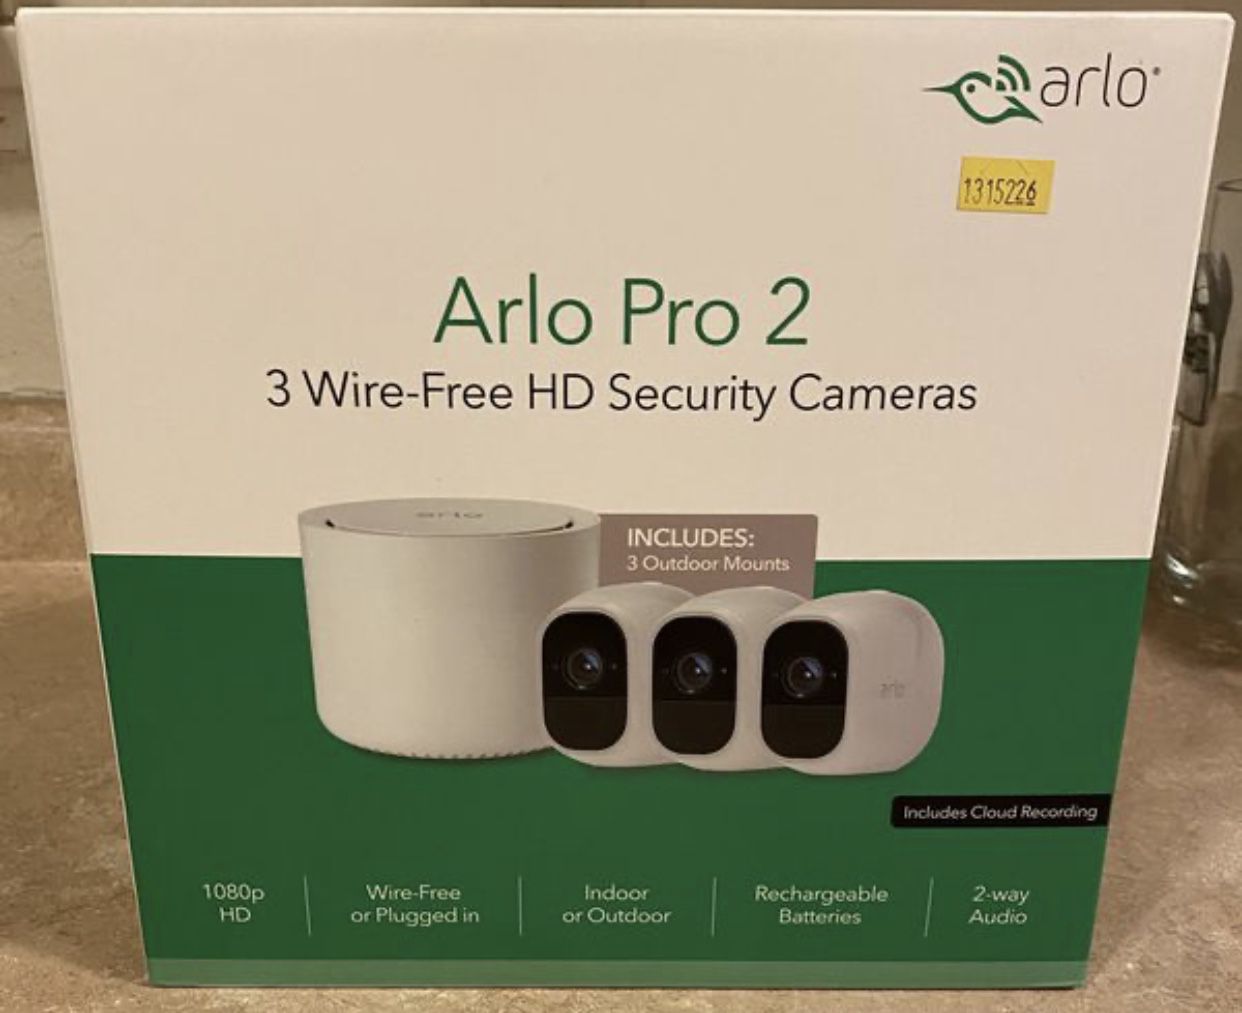 ARLO PRO 2 (3 WIRE FREE HIGH DEFINITION SECURITY 3 CAMERA SYSTEM)